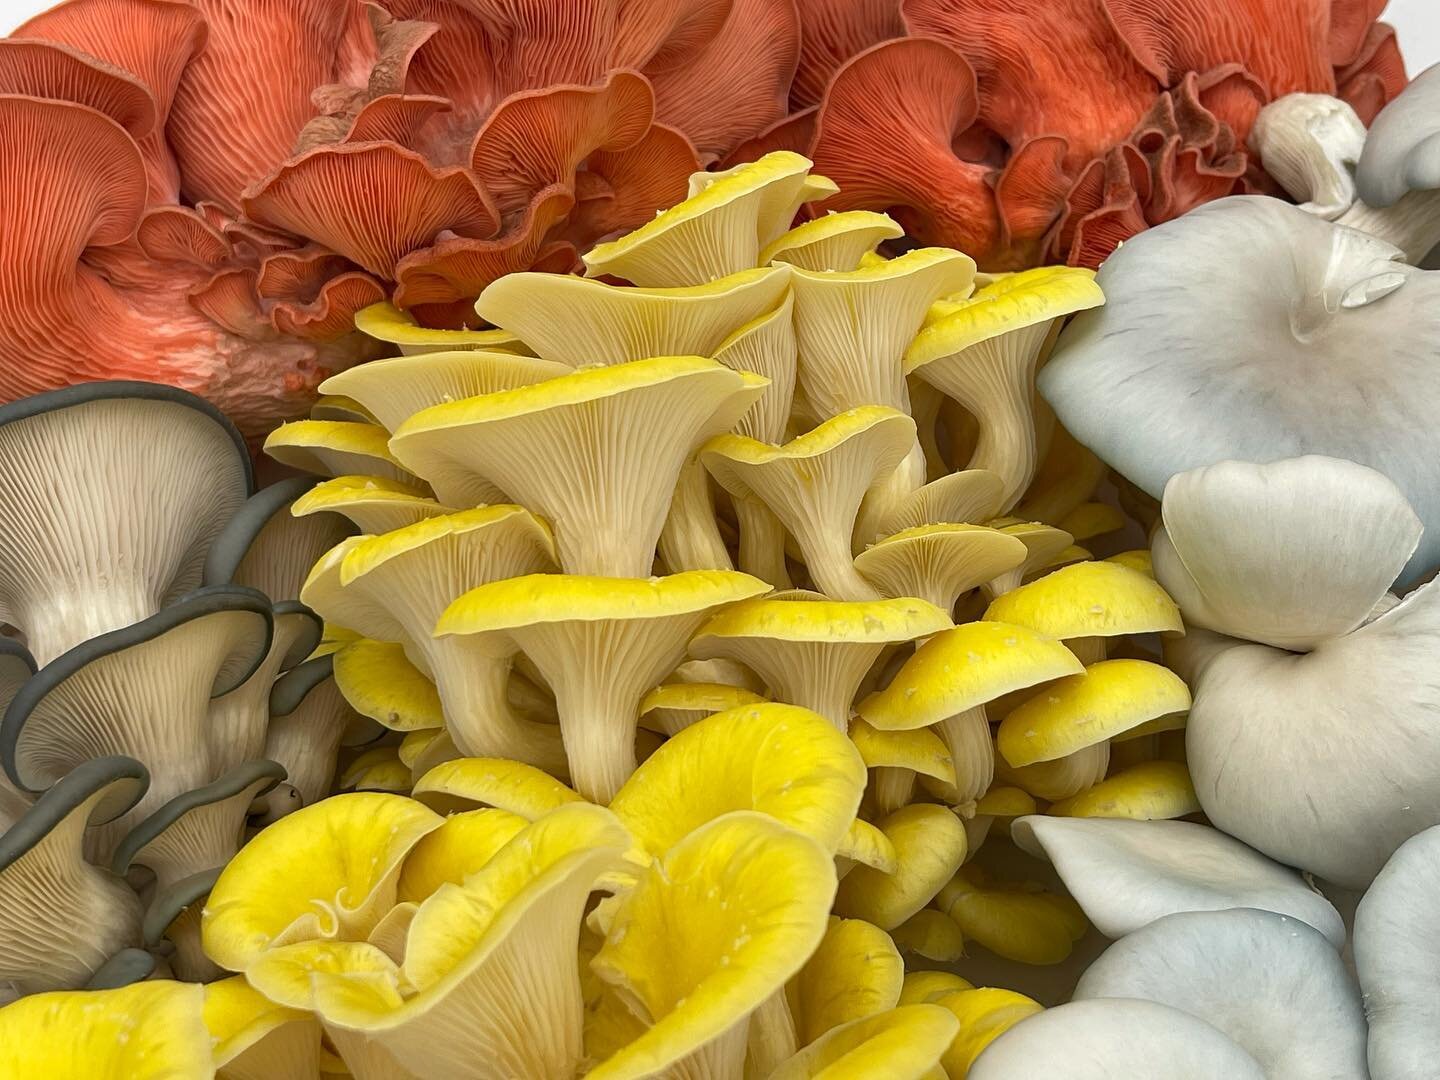 Eat the rainbow&hellip;🌈 

&hellip;of oyster mushrooms!!! 🍄 

They all have slightly different flavors, similar to how red wines taste different from each other.

Try them all and let us know your fave!

❤️🍄❤️

#oystermushrooms #foodrainbow🌈 #eat